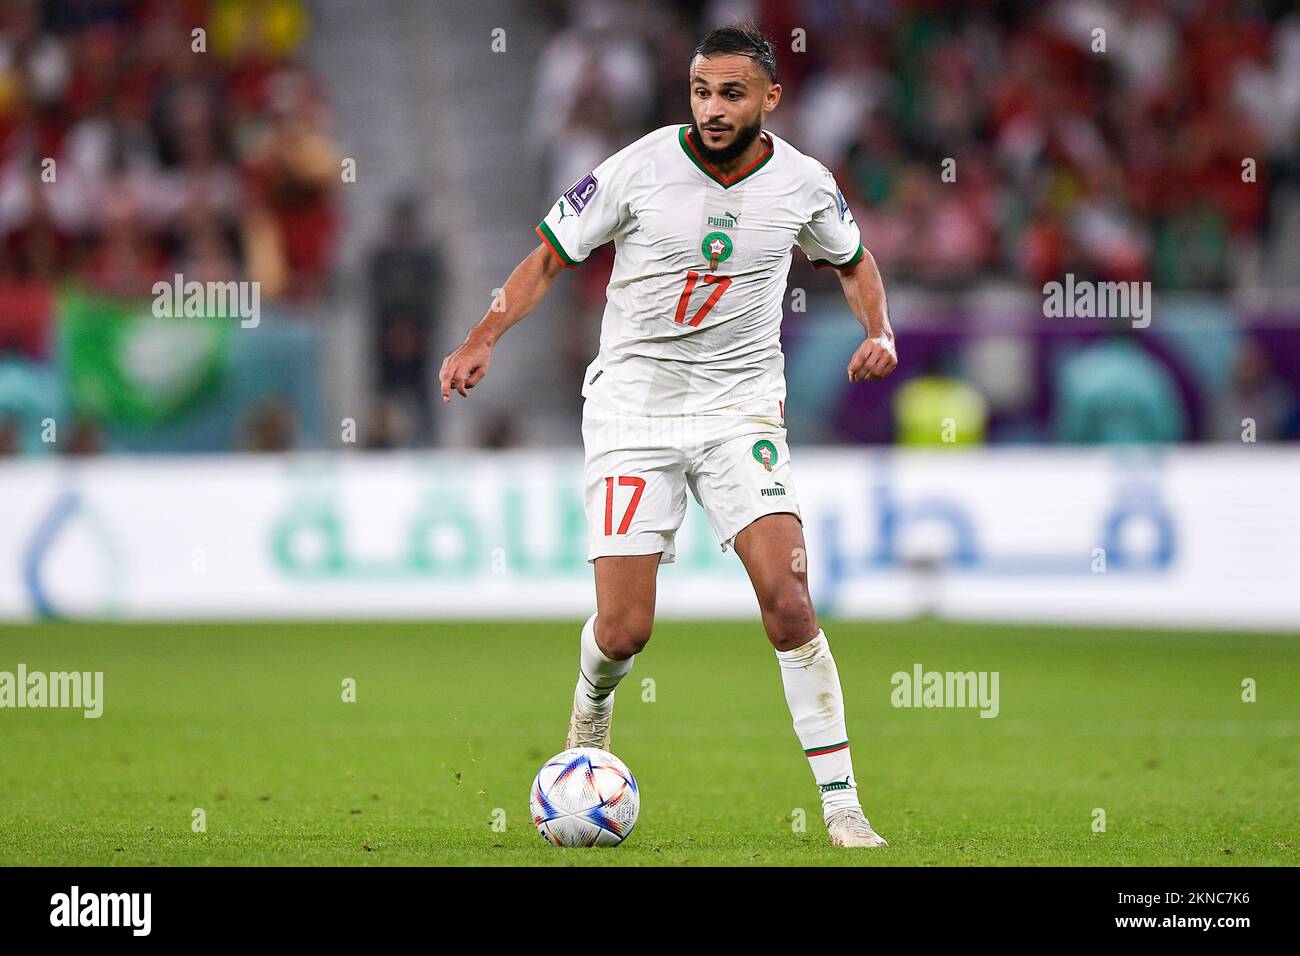 DOHA, QATAR - NOVEMBER 27: Sofiane Boufal of Morocco runs with the ball during the Group F - FIFA World Cup Qatar 2022 match between Belgium and Morocco at the Al Thumama Stadium on November 27, 2022 in Doha, Qatar (Photo by Pablo Morano/BSR Agency) Stock Photo